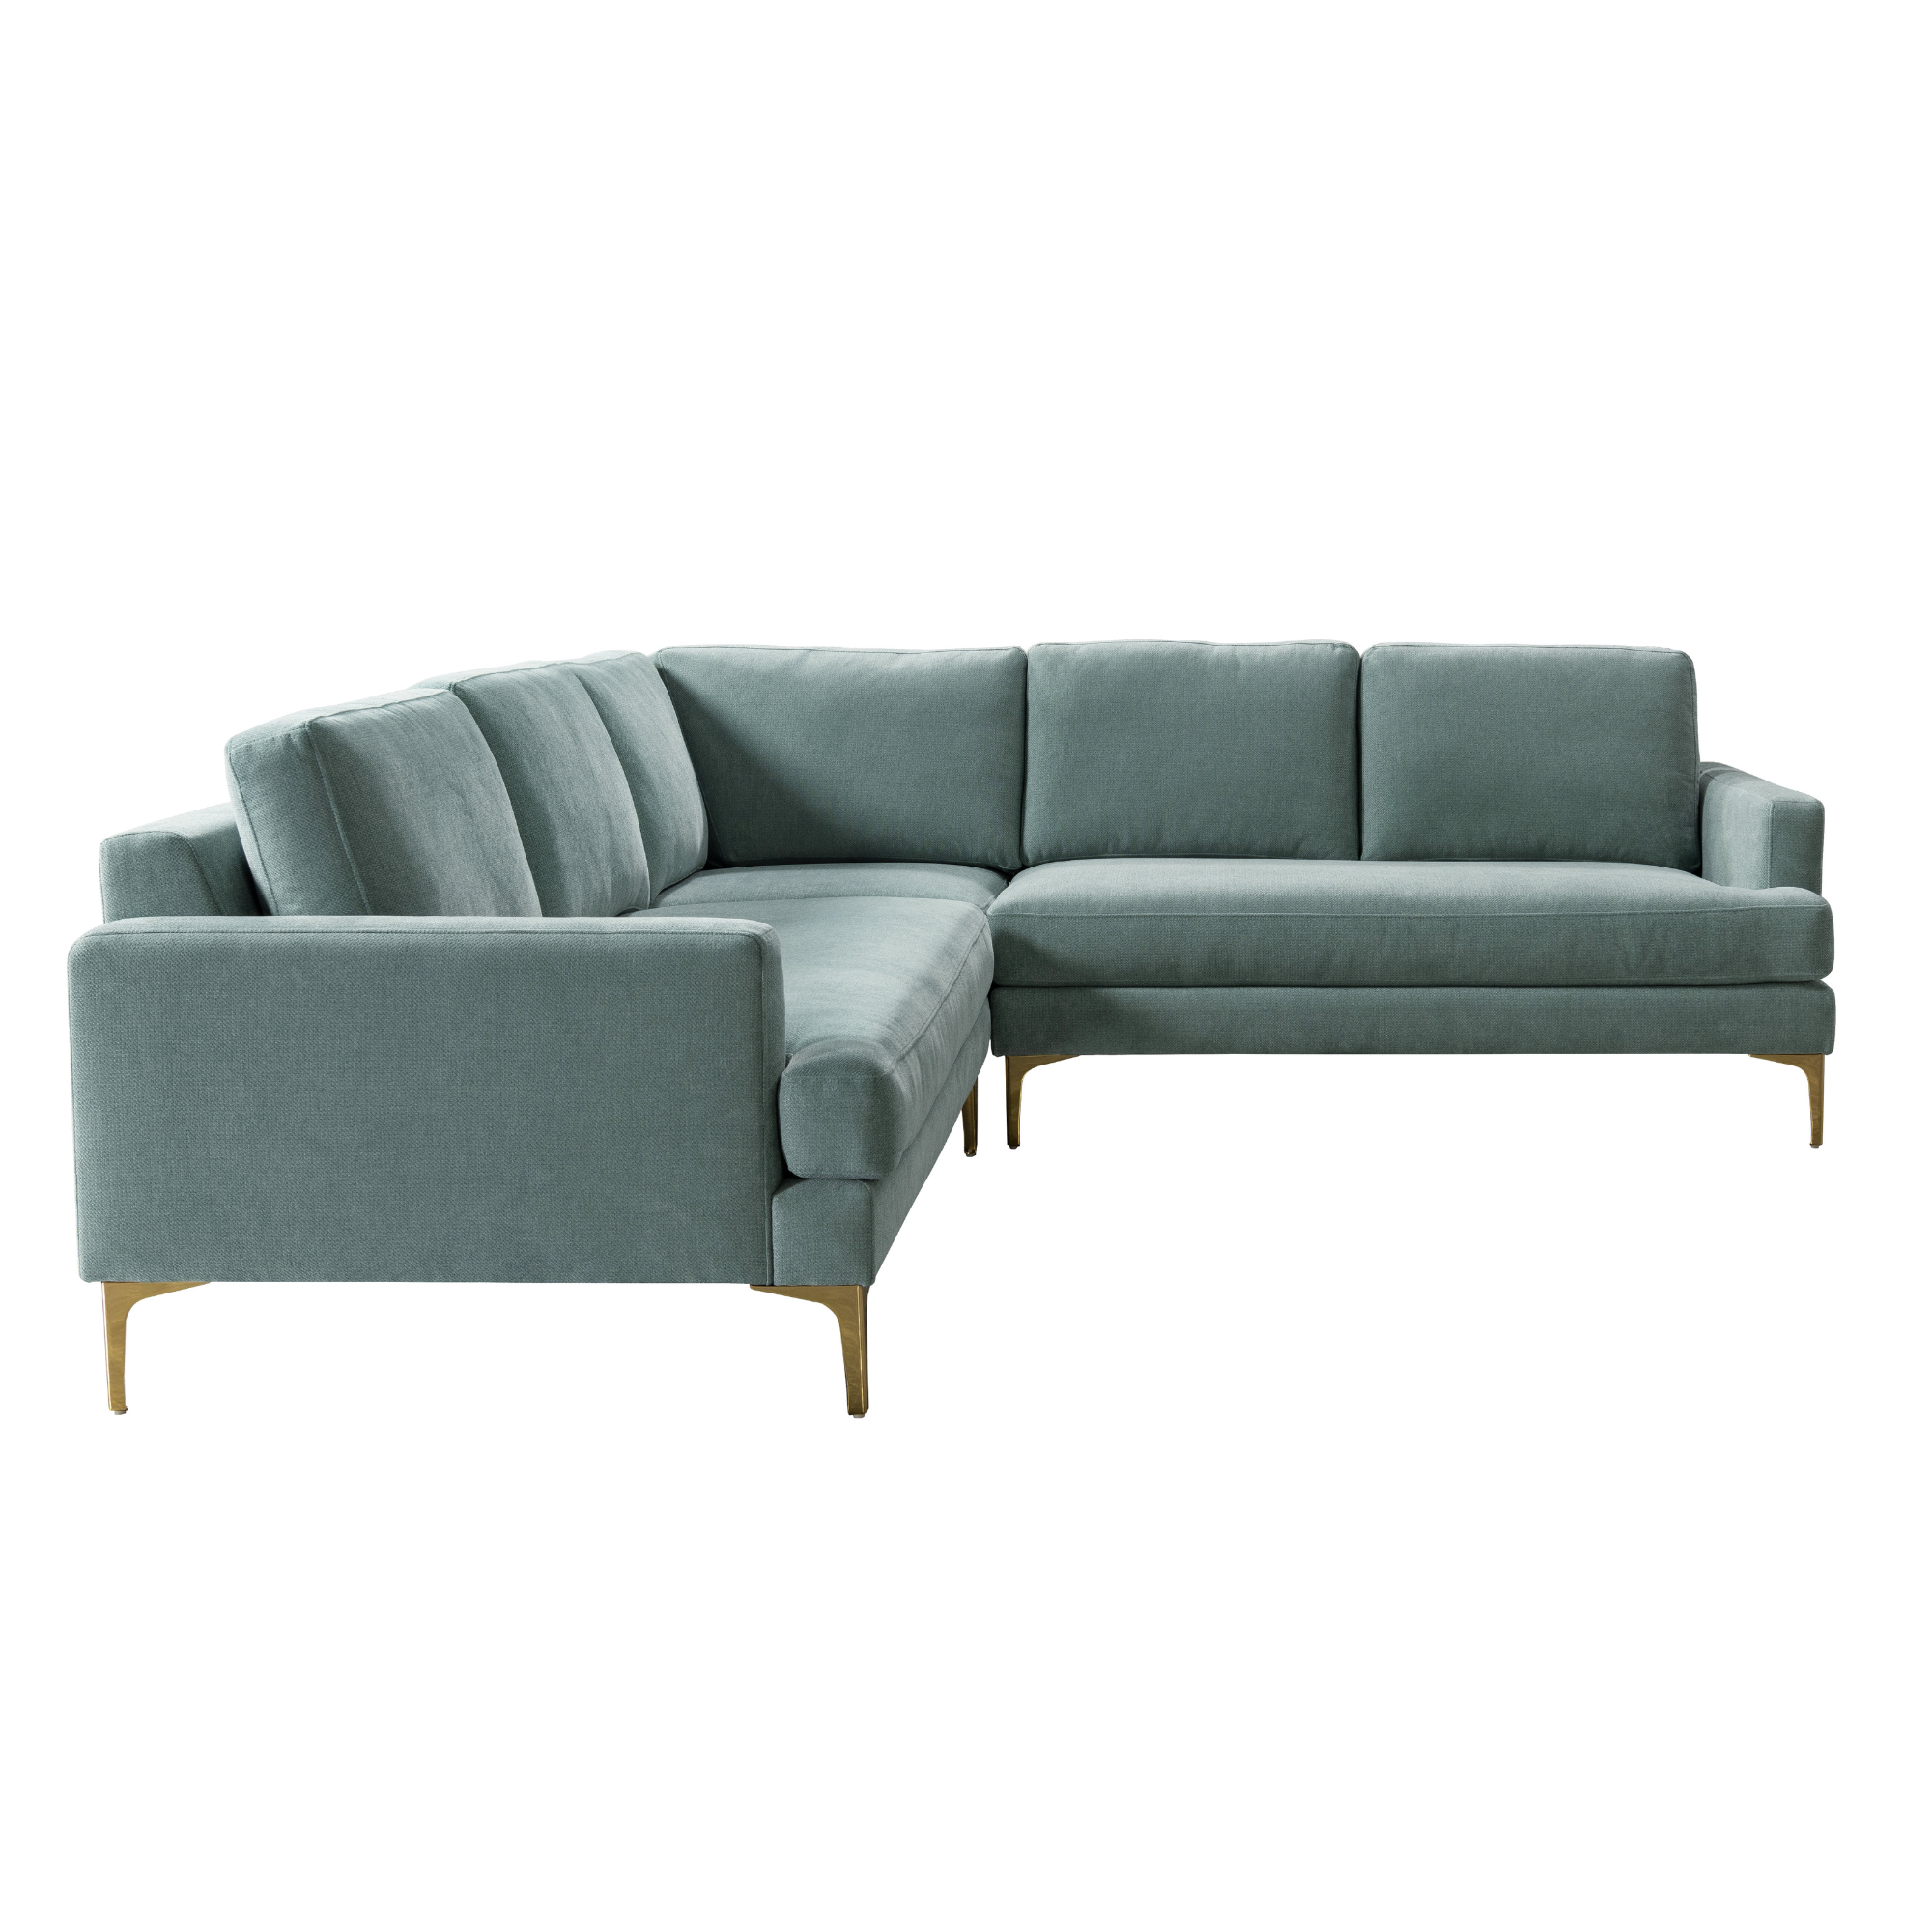 The Grey & Gold Sectional (8782156366145)